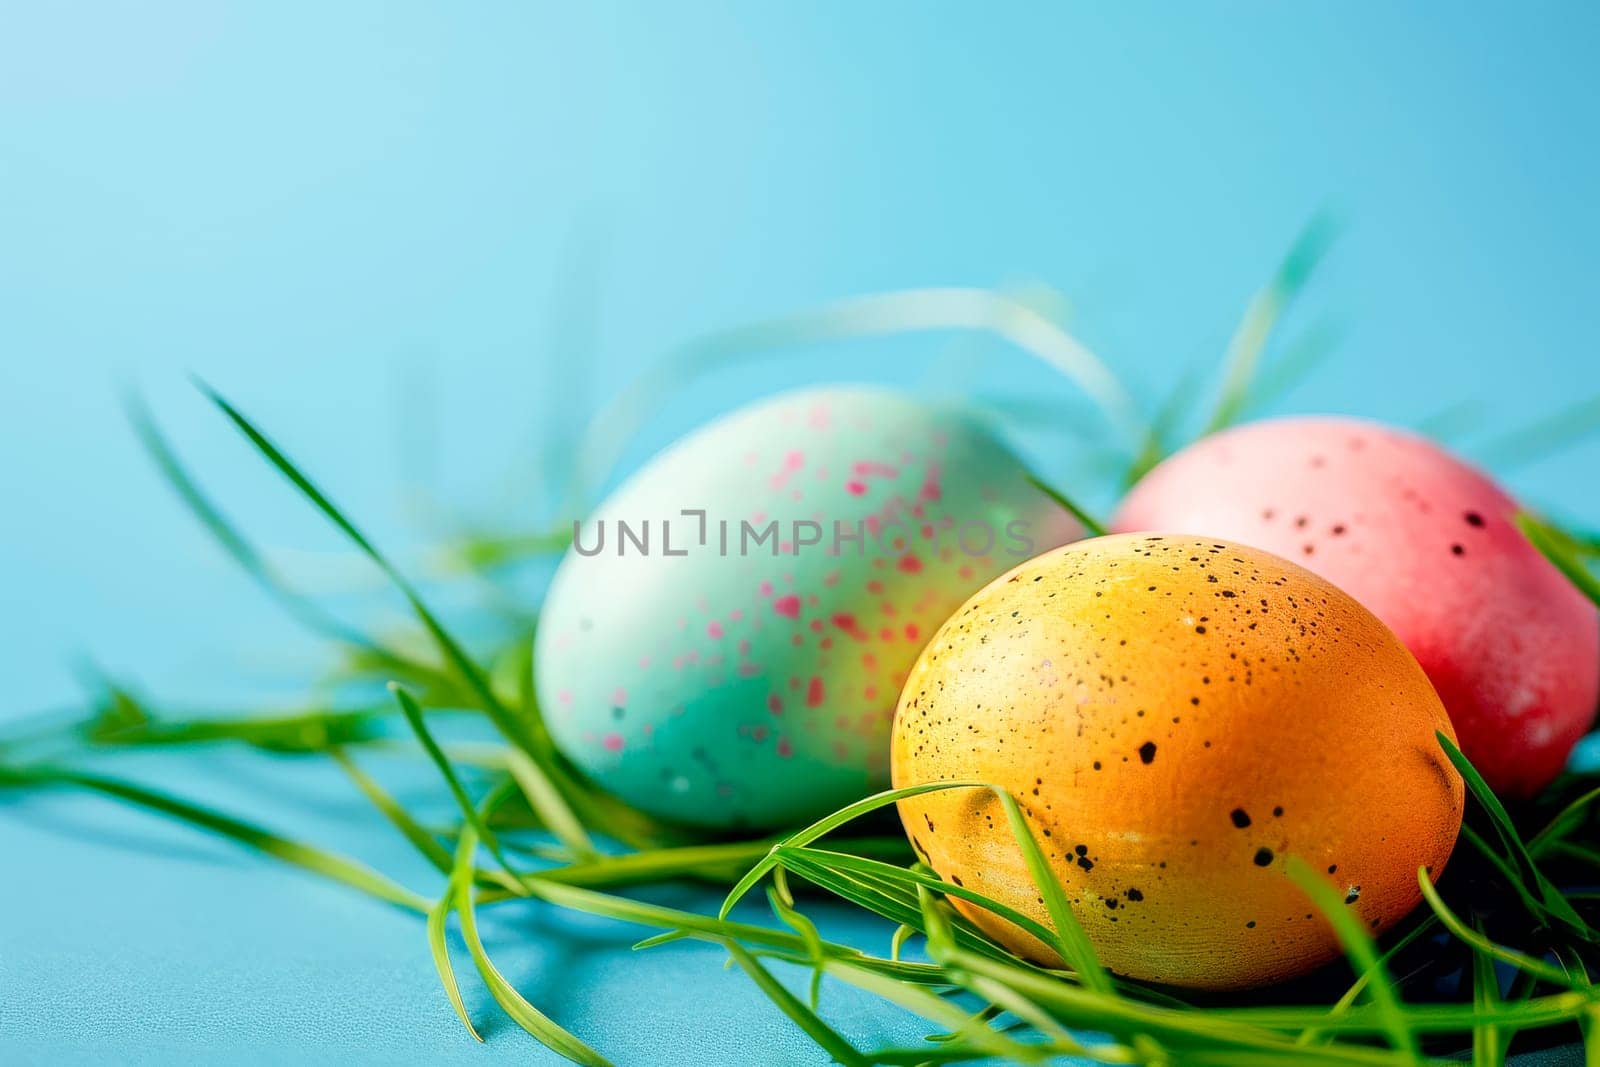 A group of three Easter eggs placed neatly on top of lush green grass.